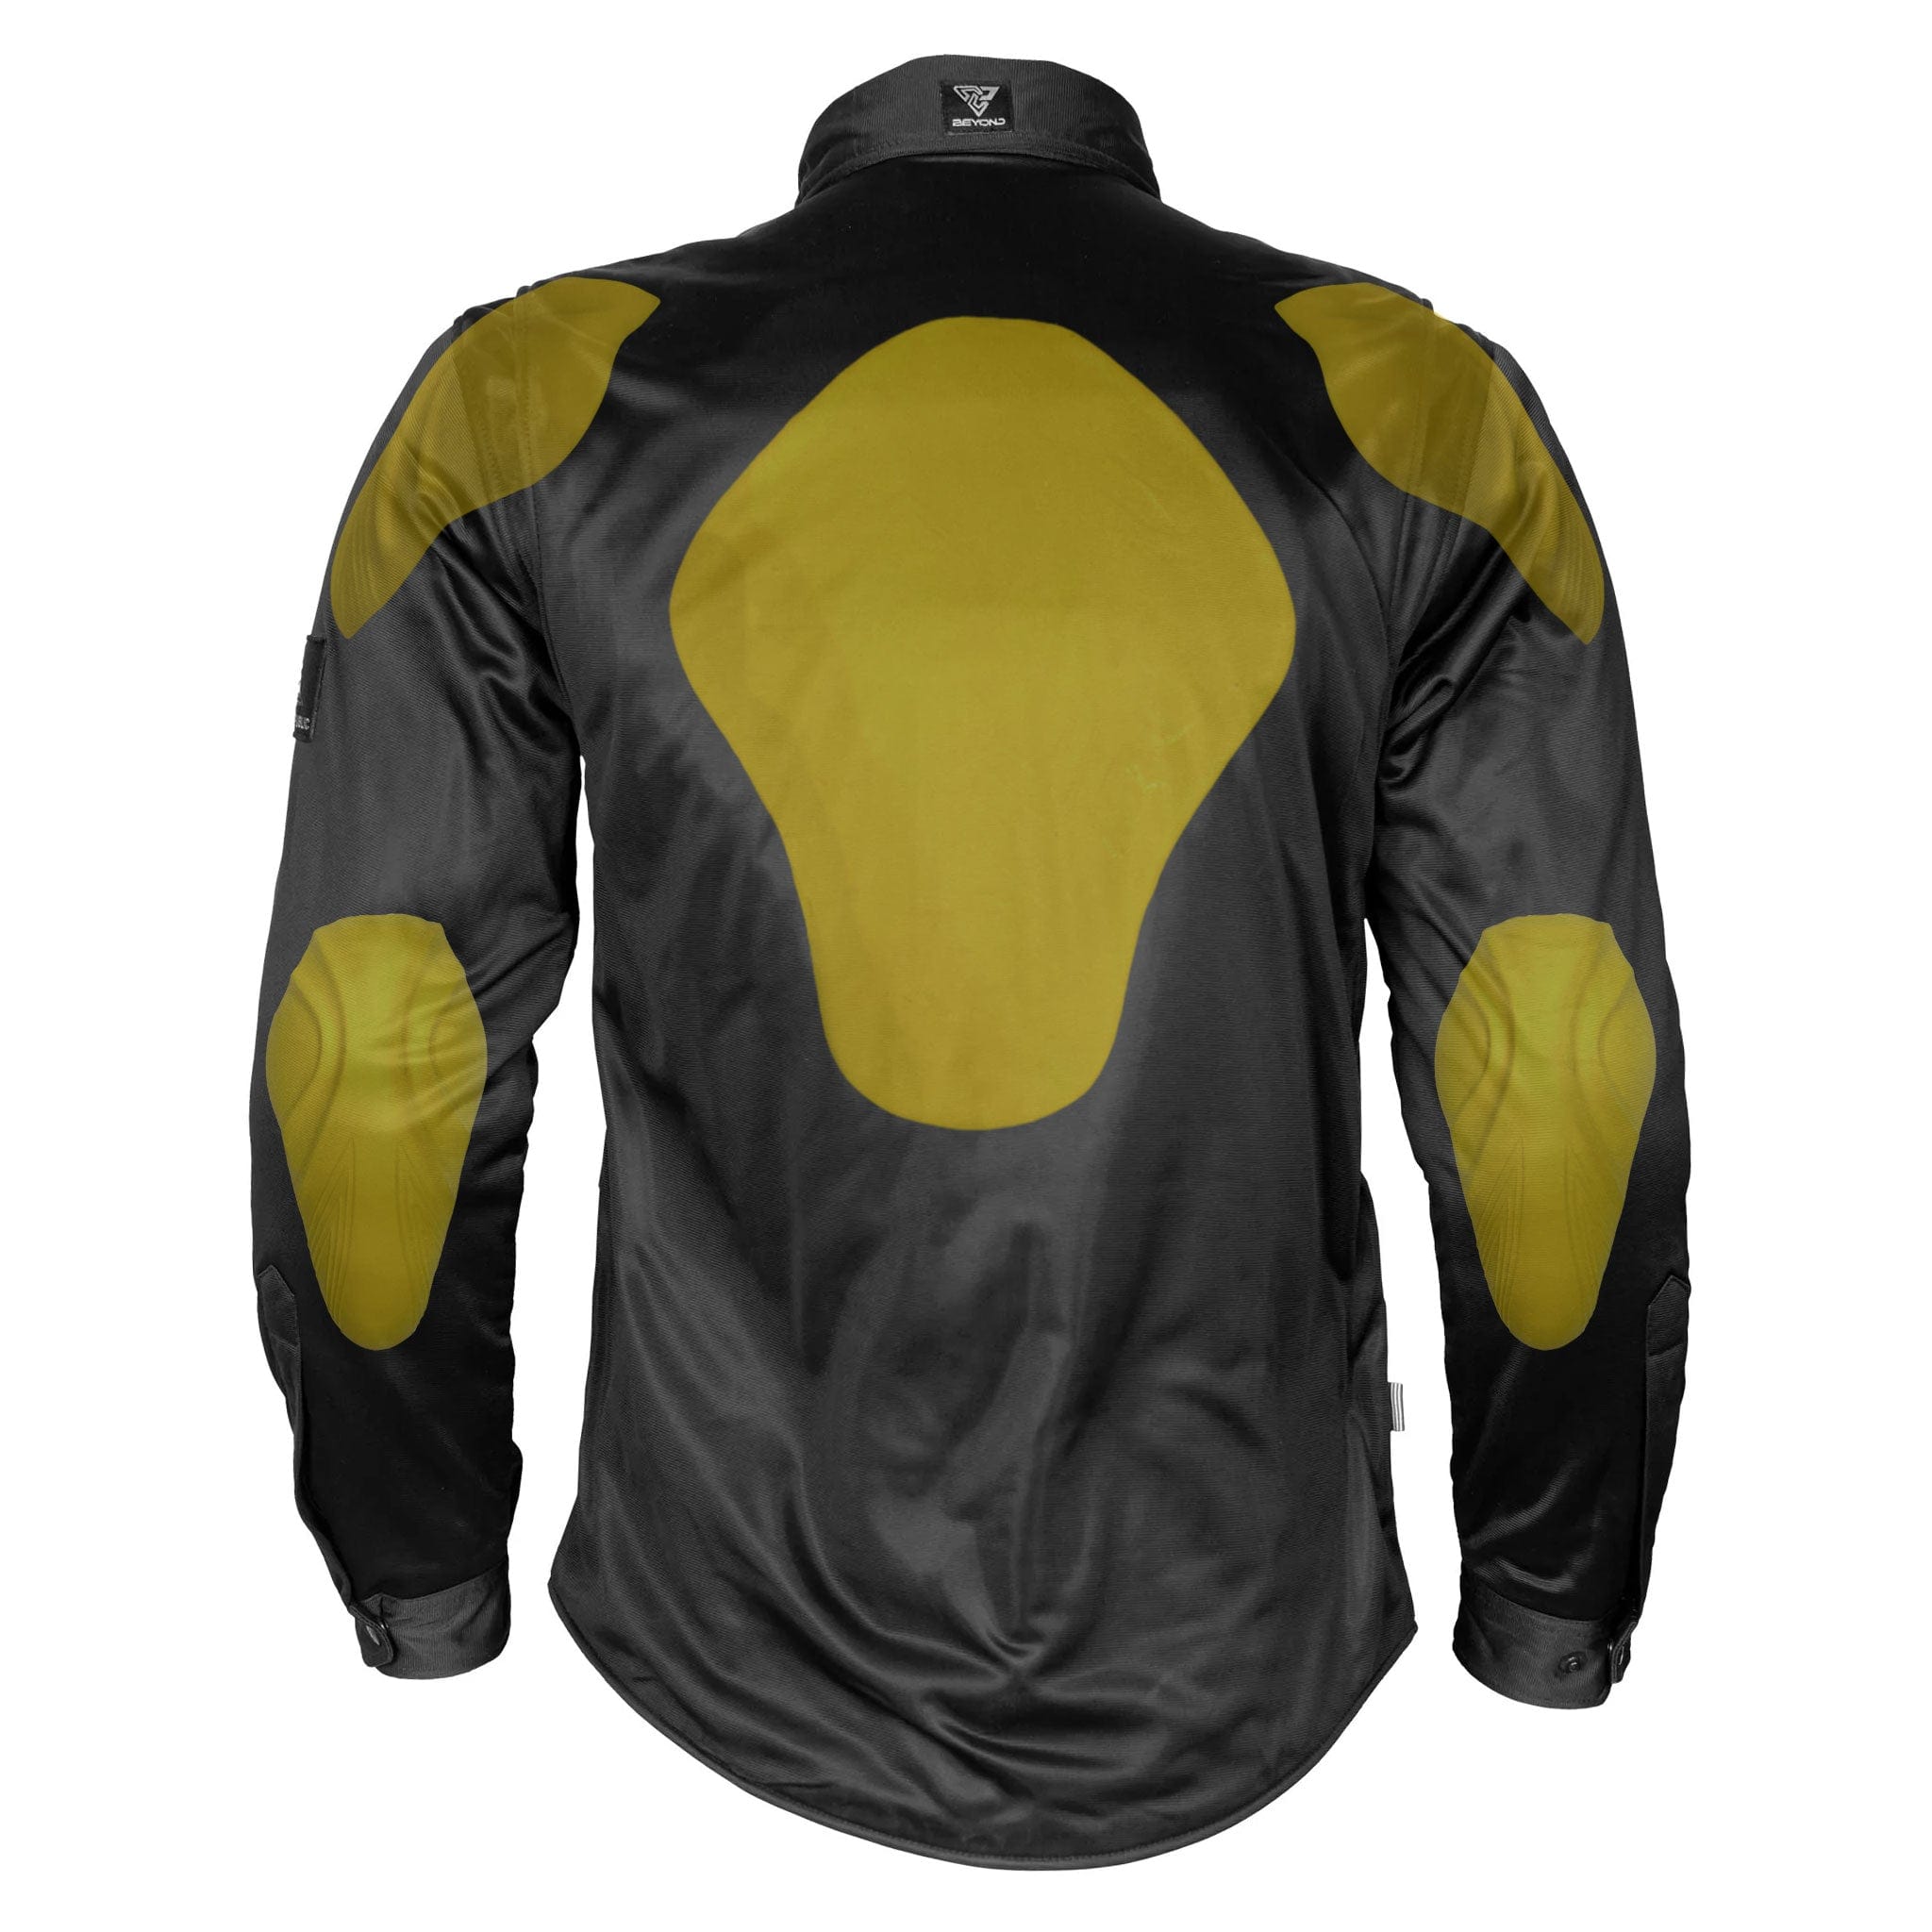 Ultra Protective Shirt - Black Solid with Pads